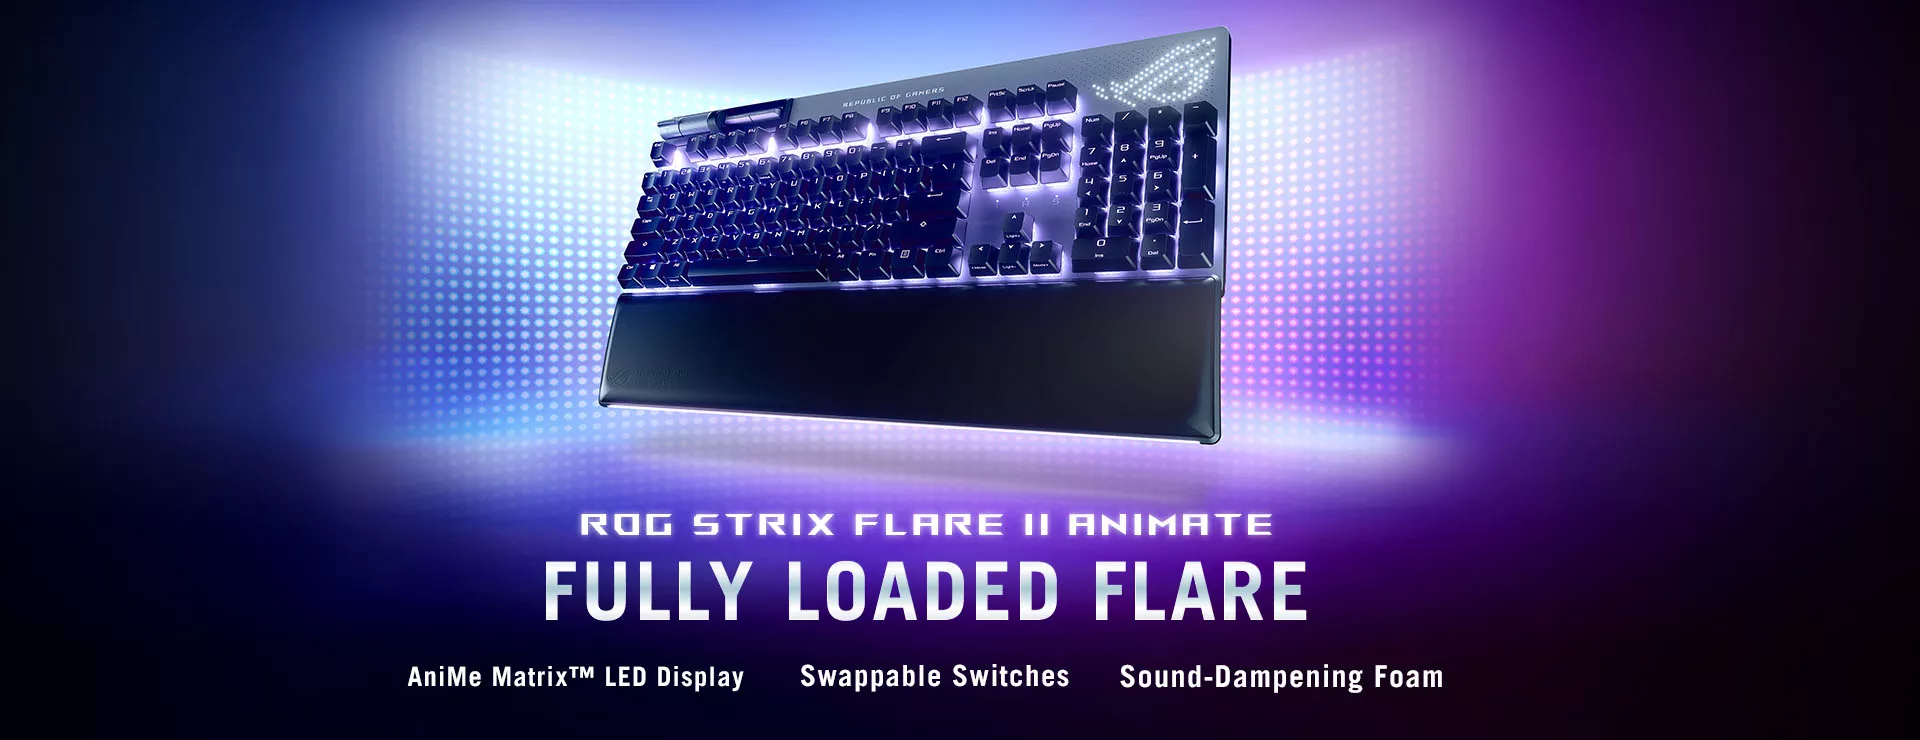 Poster visual of ROG Strix Flare II Animate keyboard in front of a wall of LEDs